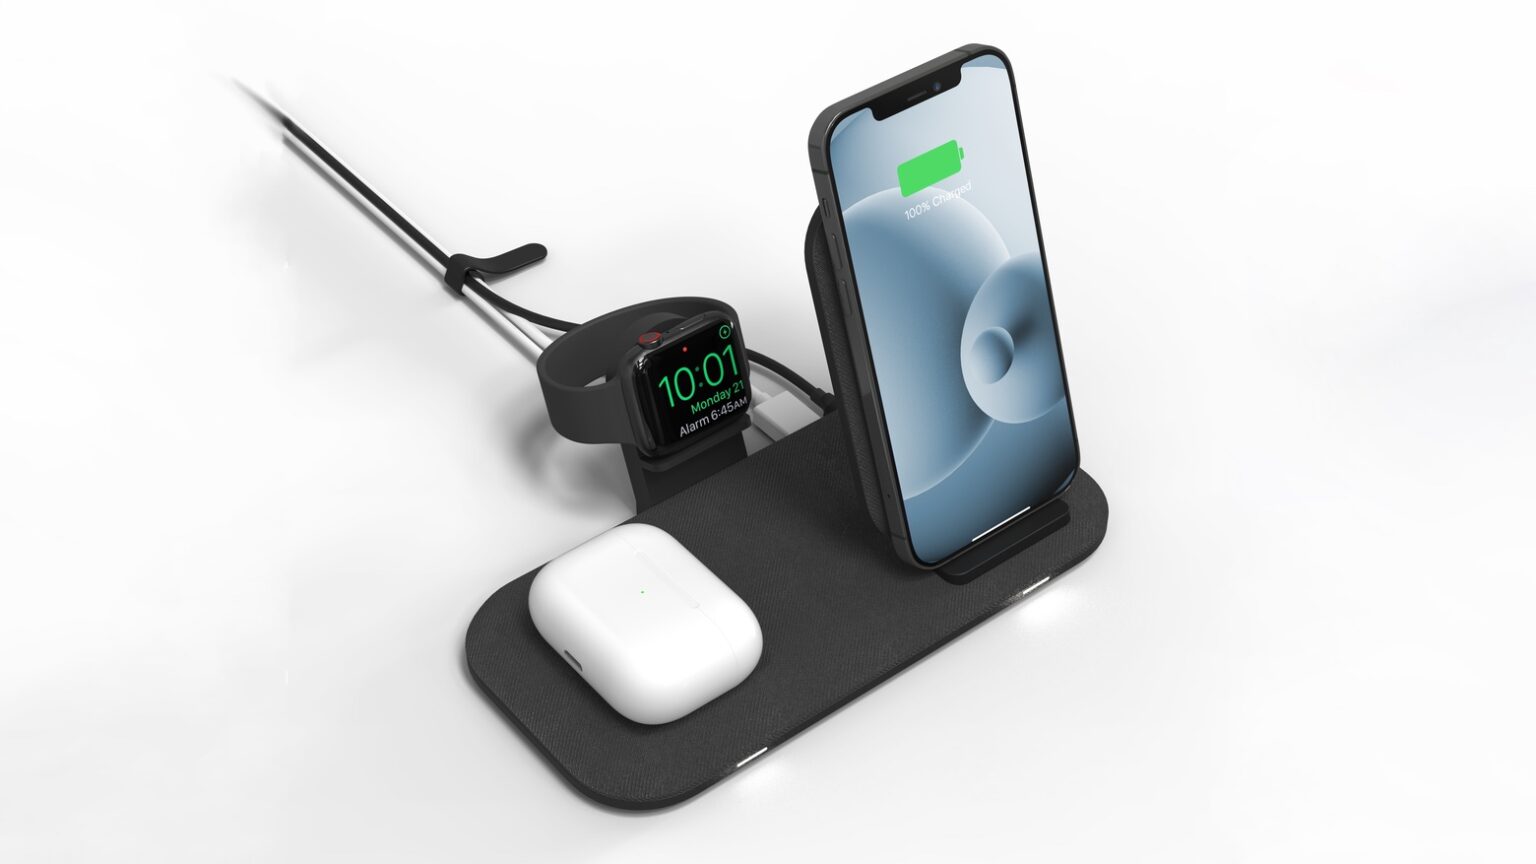 No waiting. The Mophie Wireless Charging Stand+ hit store shelves on Wednesday.